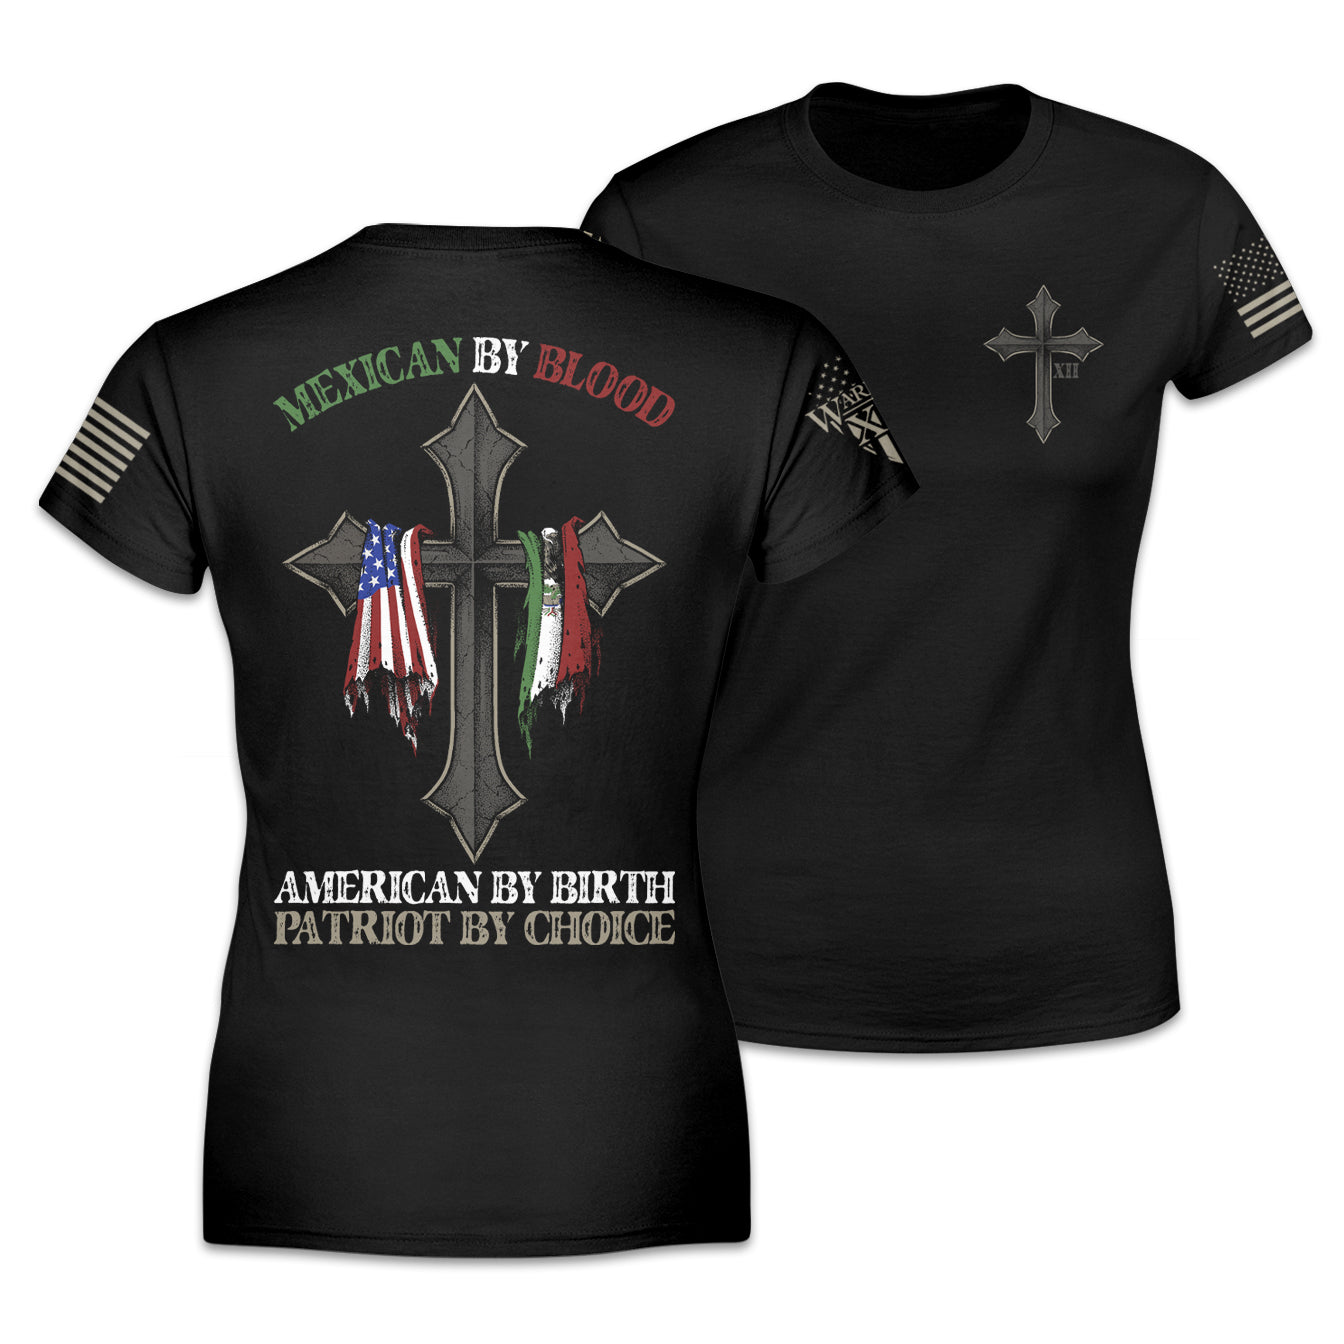 Front & back black women's relaxed fit shirt with the words "Mexican by blood, American by birth, patriot by choice" with a cross holding the American and Mexican flag printed on the shirt.